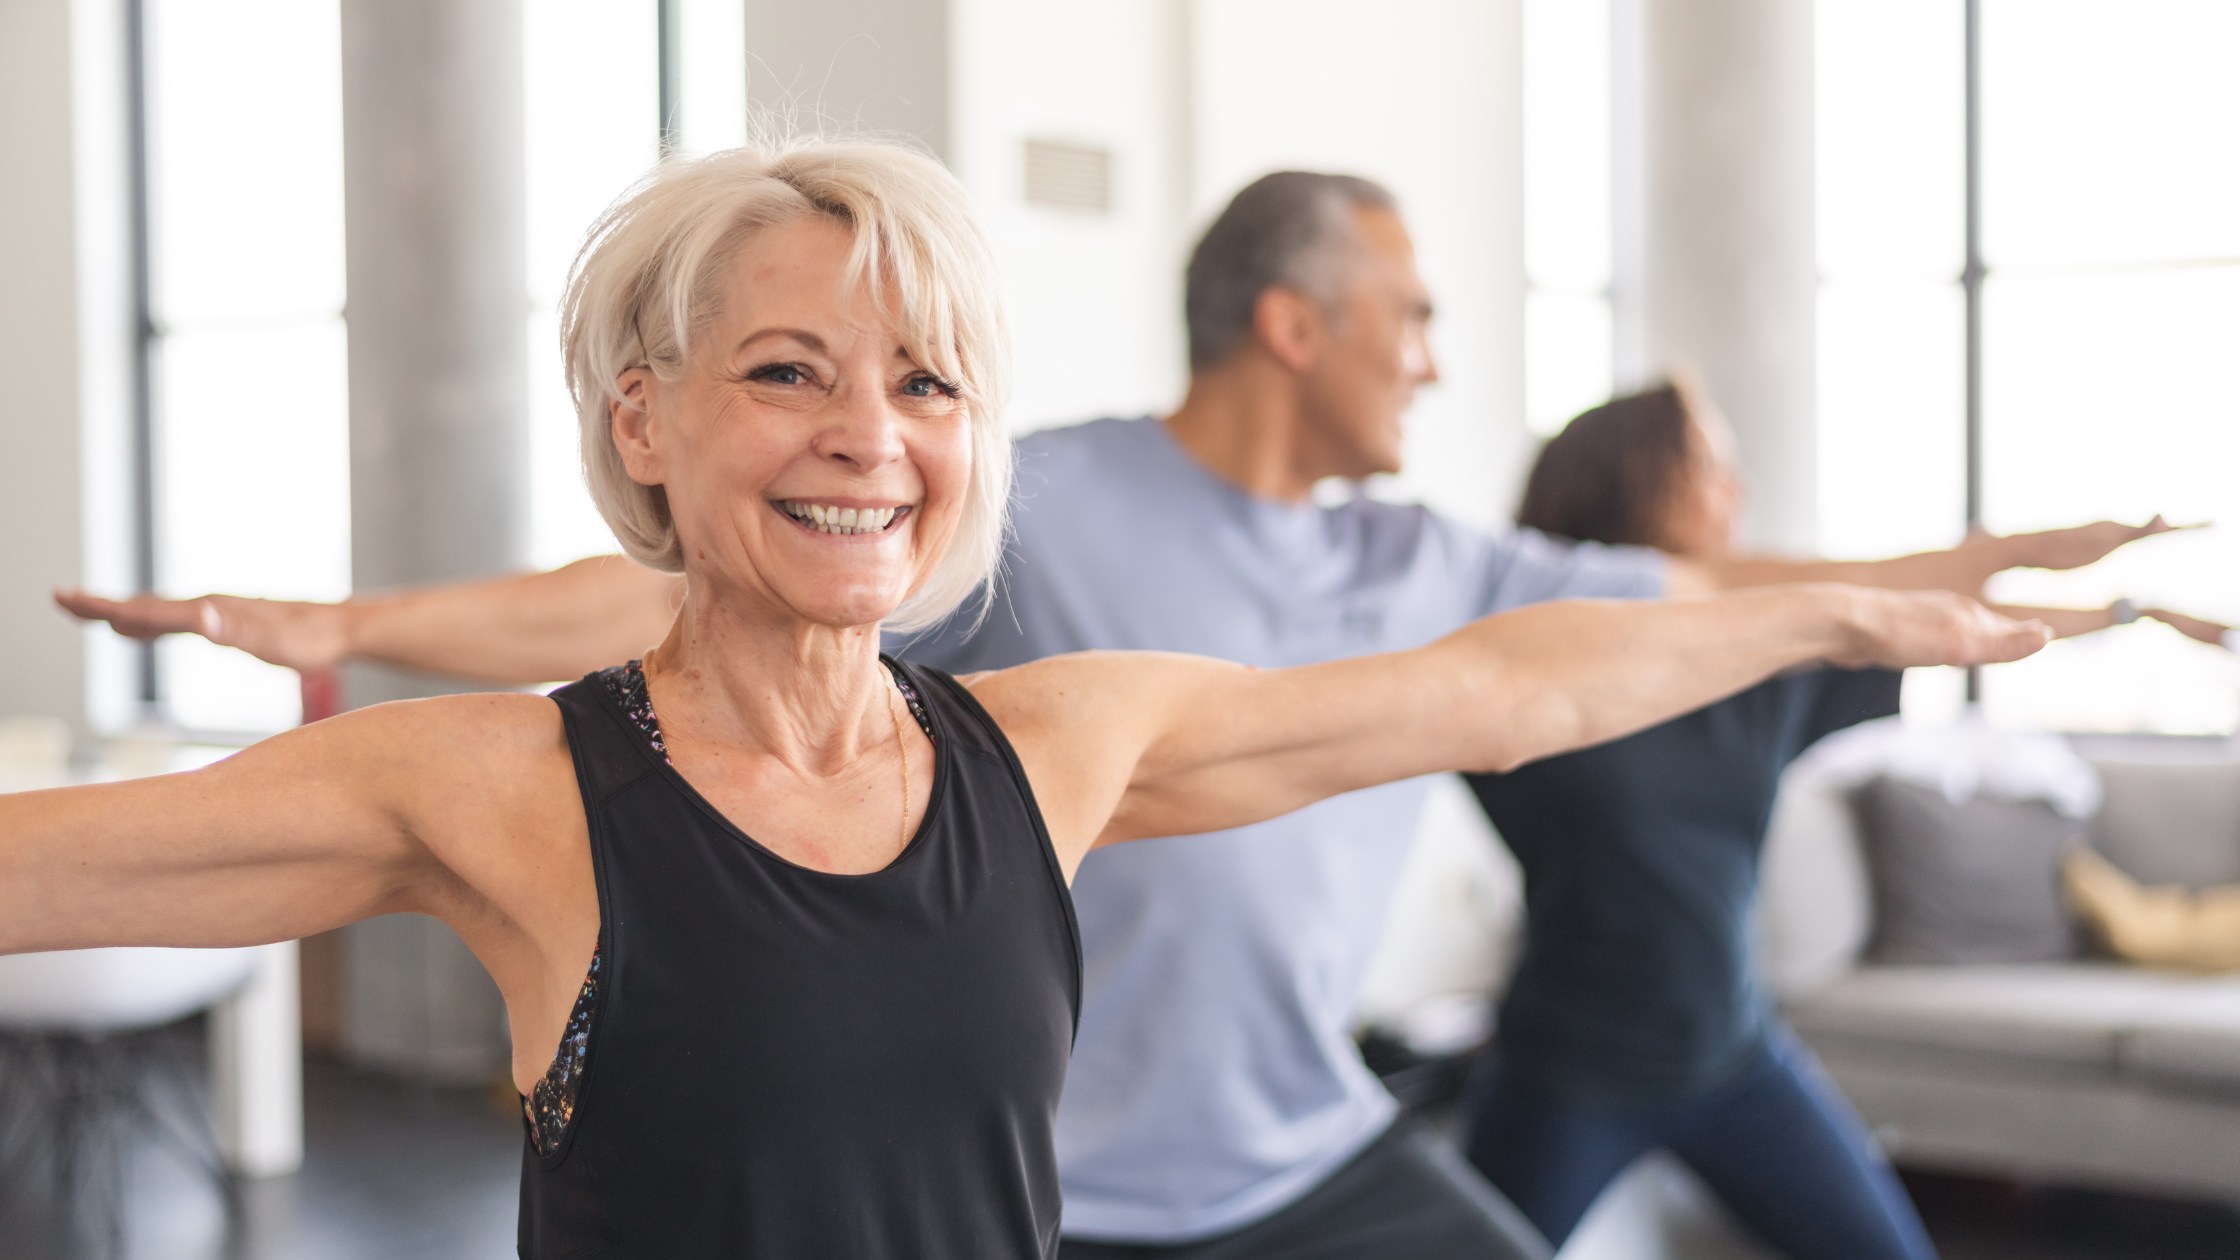 Happy older couple at the gym, towels over shoulder, woman holding yoga mat